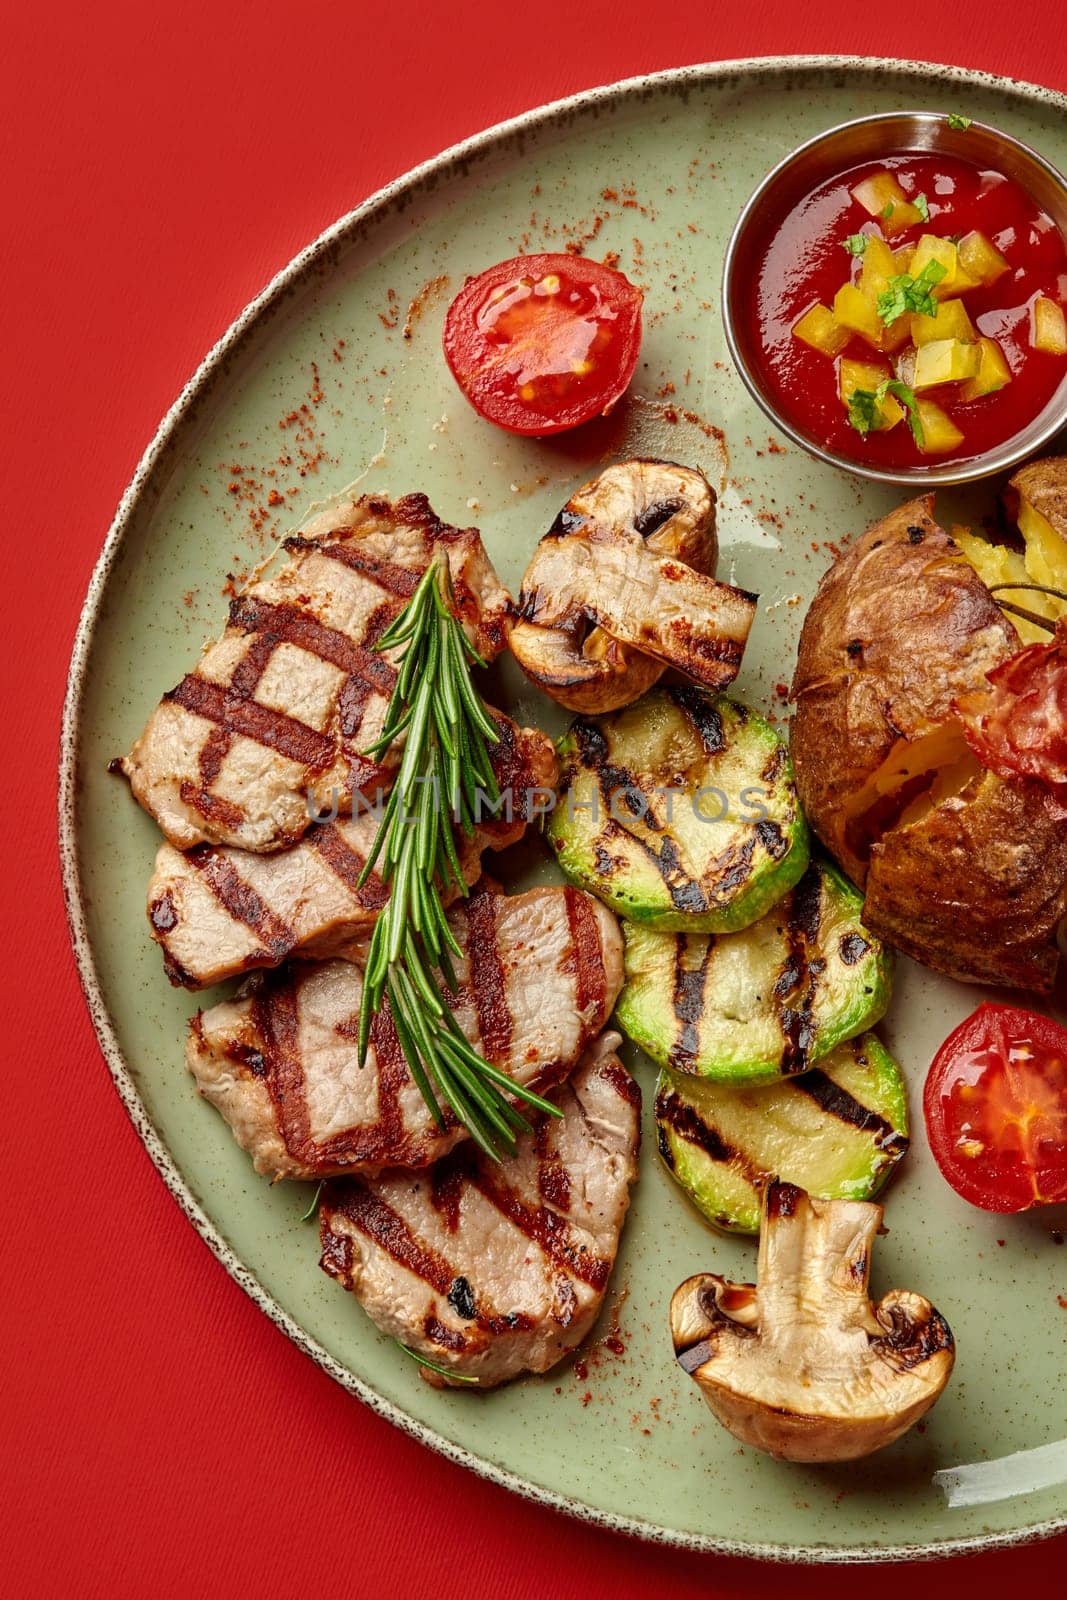 Juicy grilled pork steak seasoned with fresh rosemary served with side of with roasted veggies, jacket potato with bacon, and tomato sauce with bell pepper and greens presented on vivid red background